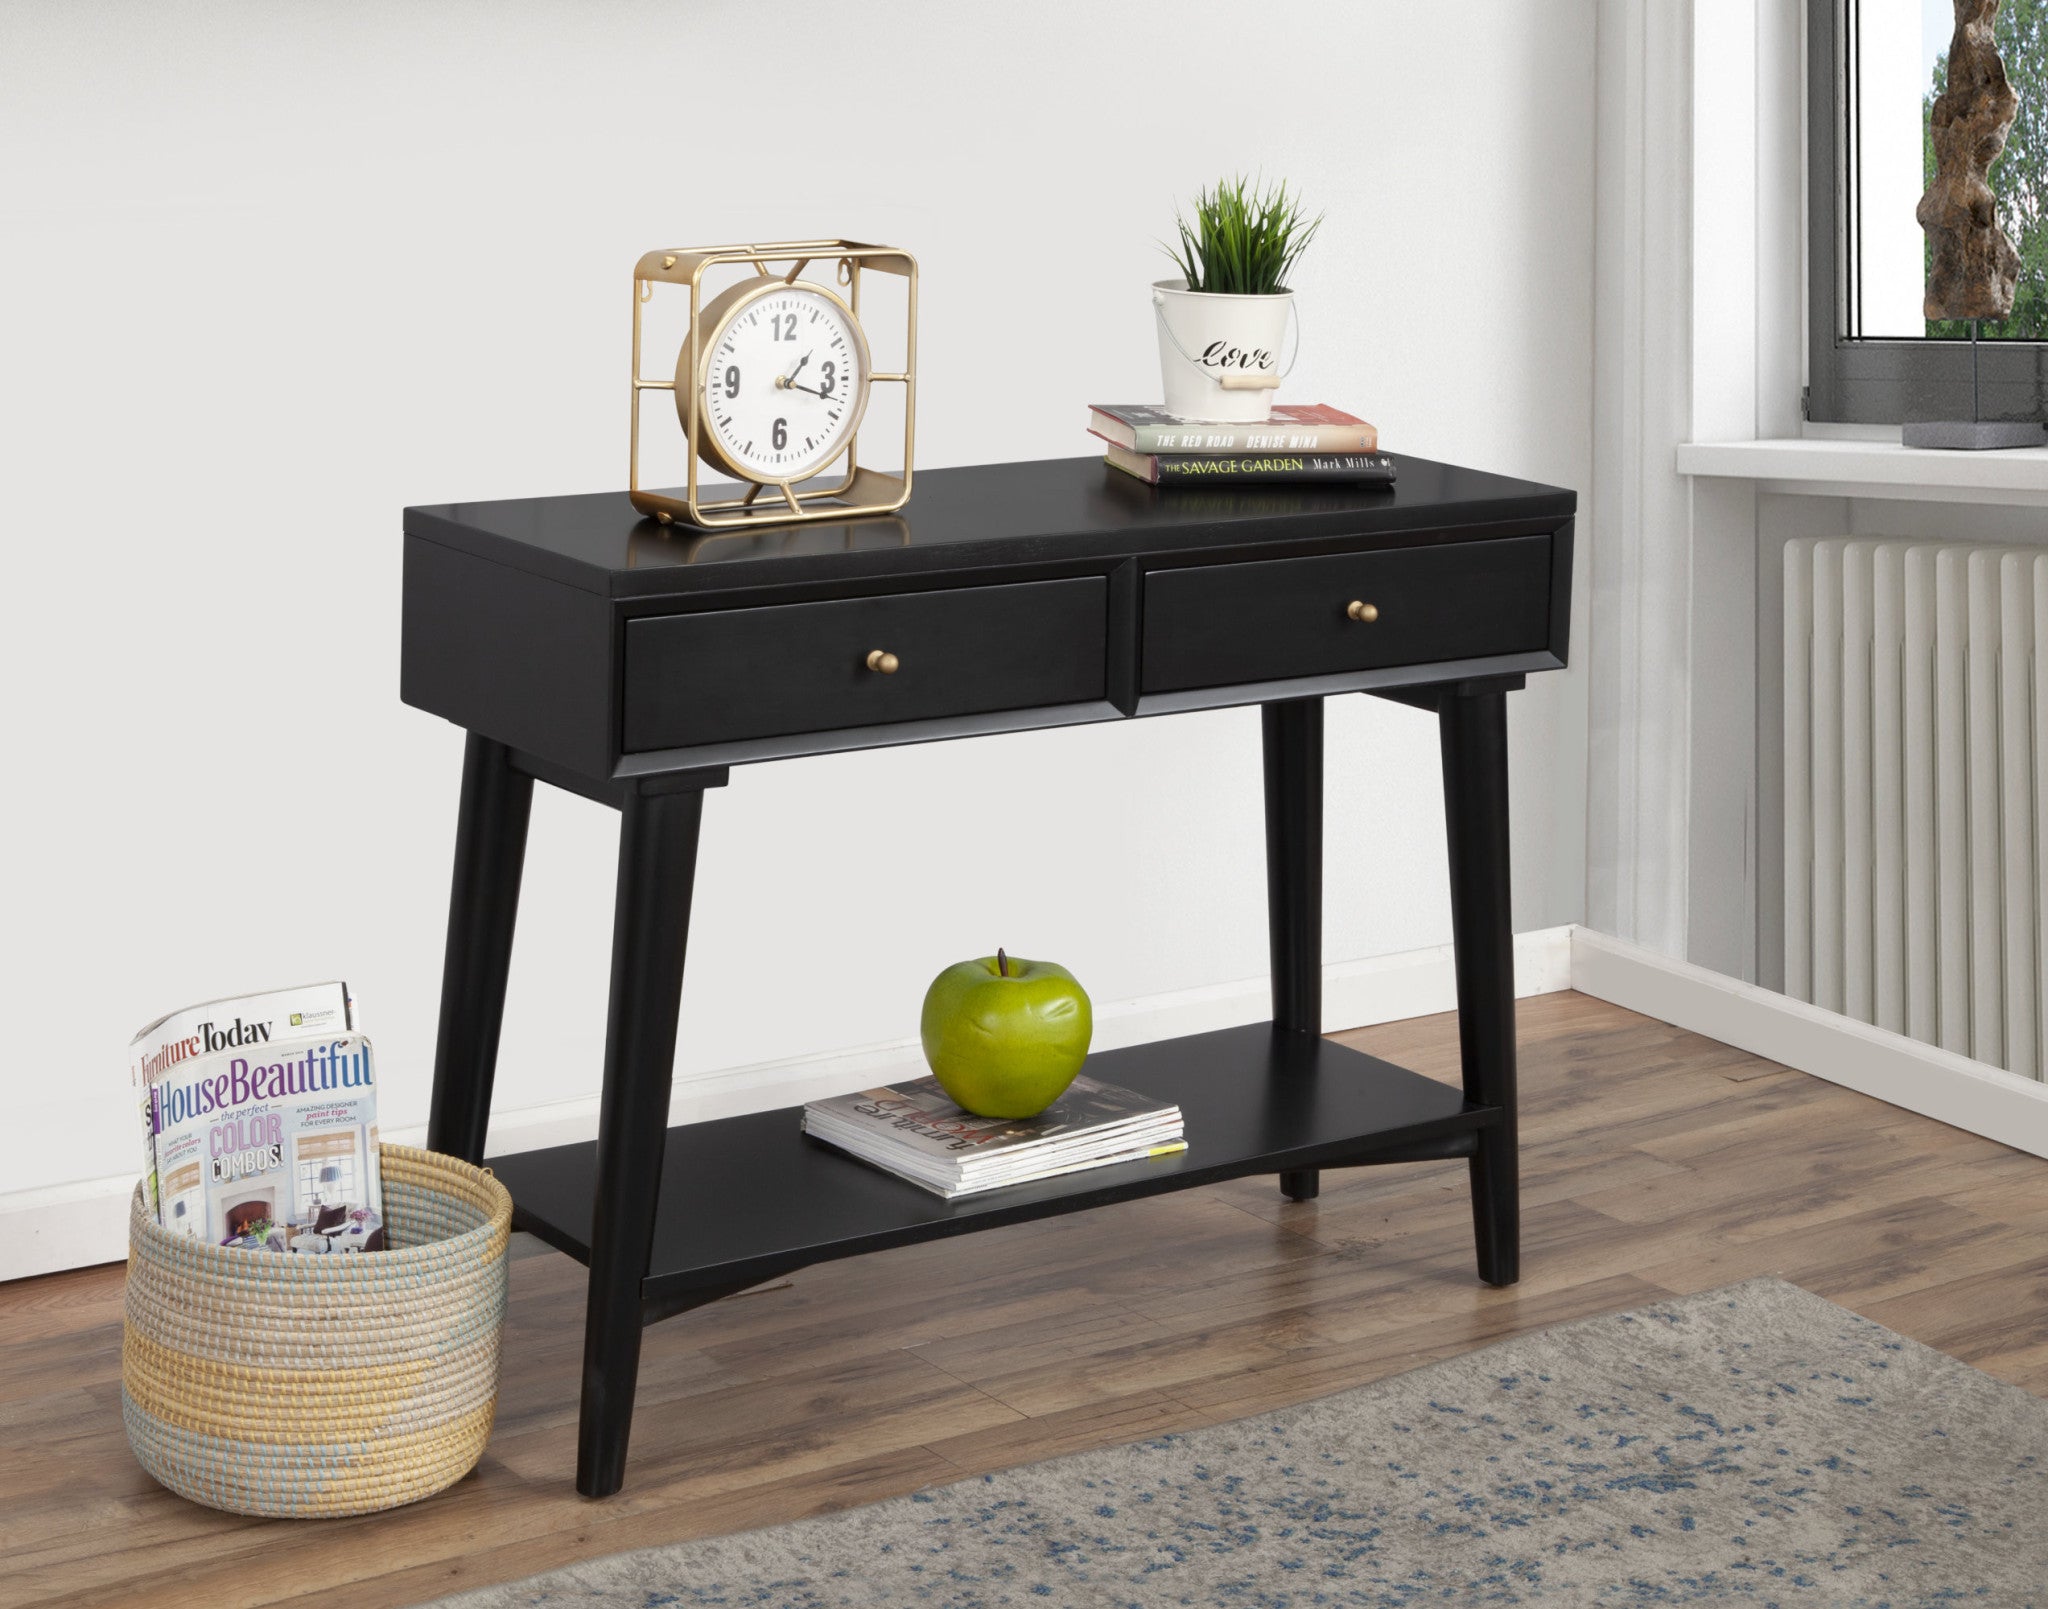 42" Black Solid and Manufactured Wood Floor Shelf Console Table With Storage With Storage